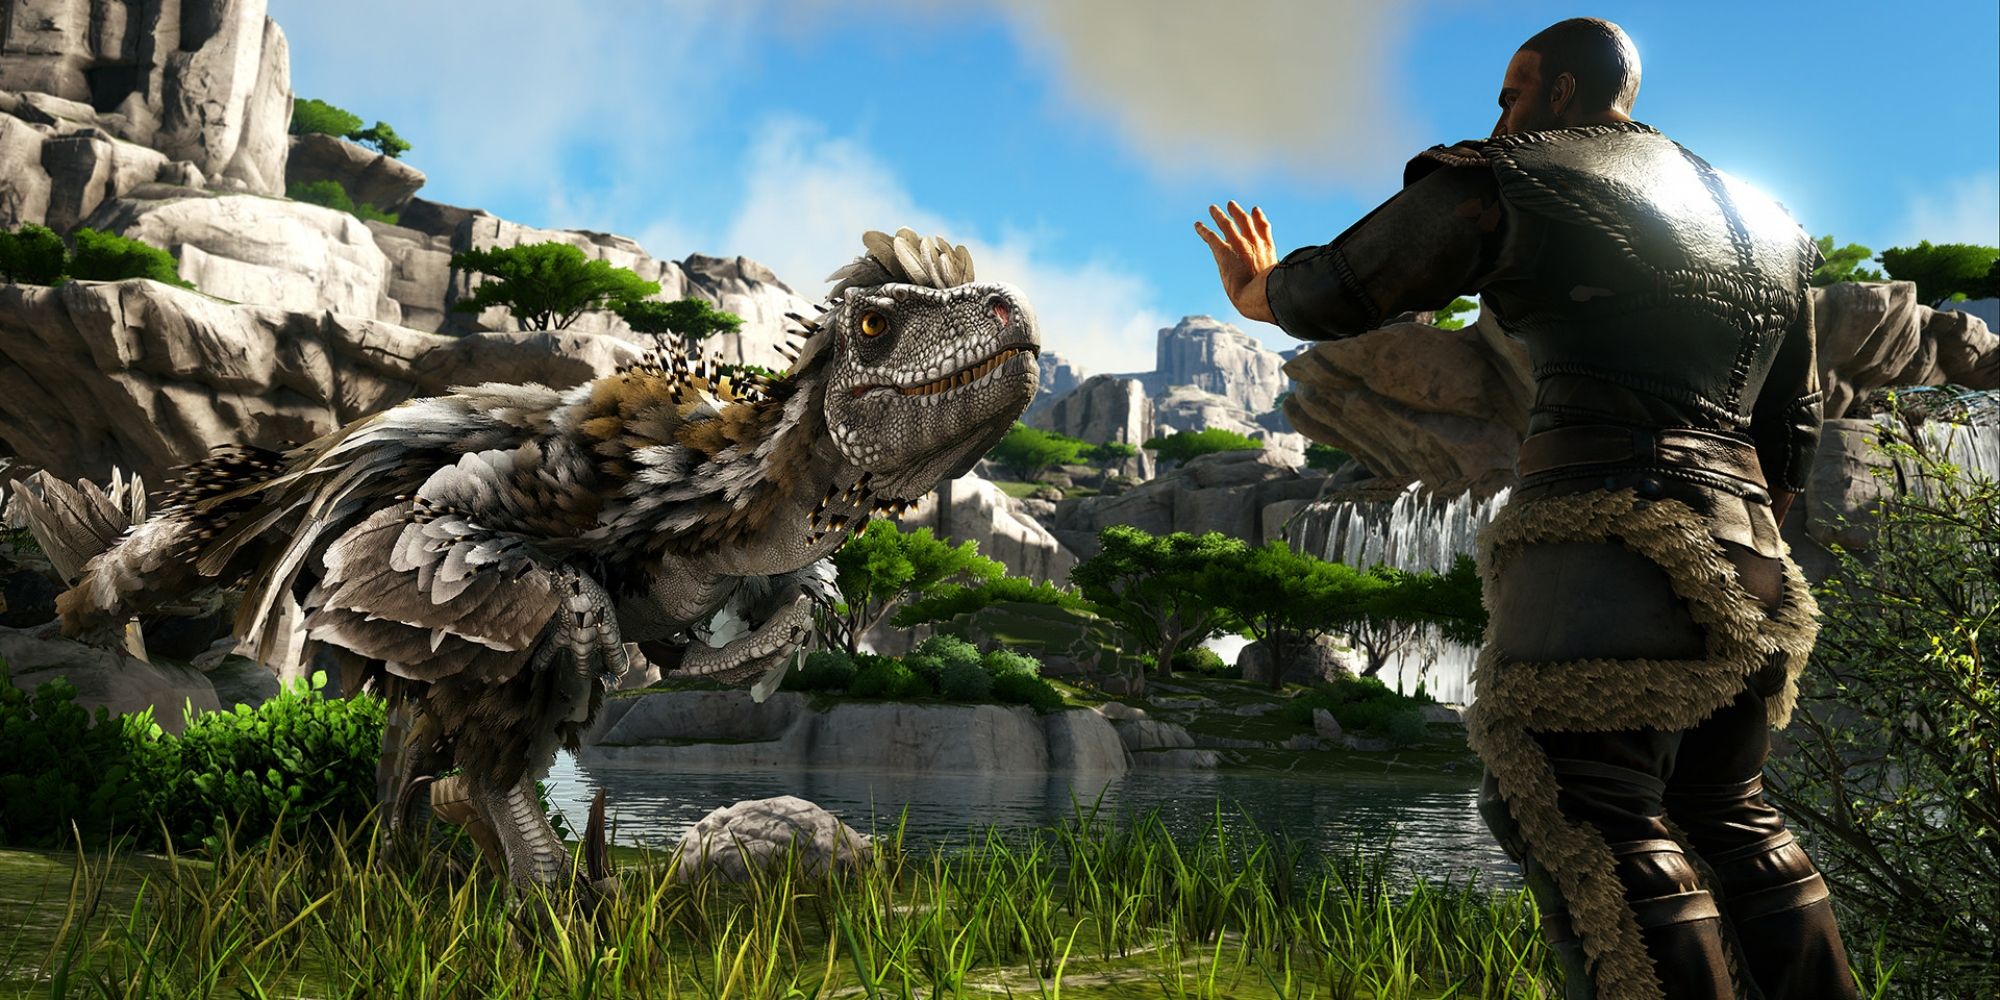 A feathery dinosaur approaches a player as the player attempts to tame them